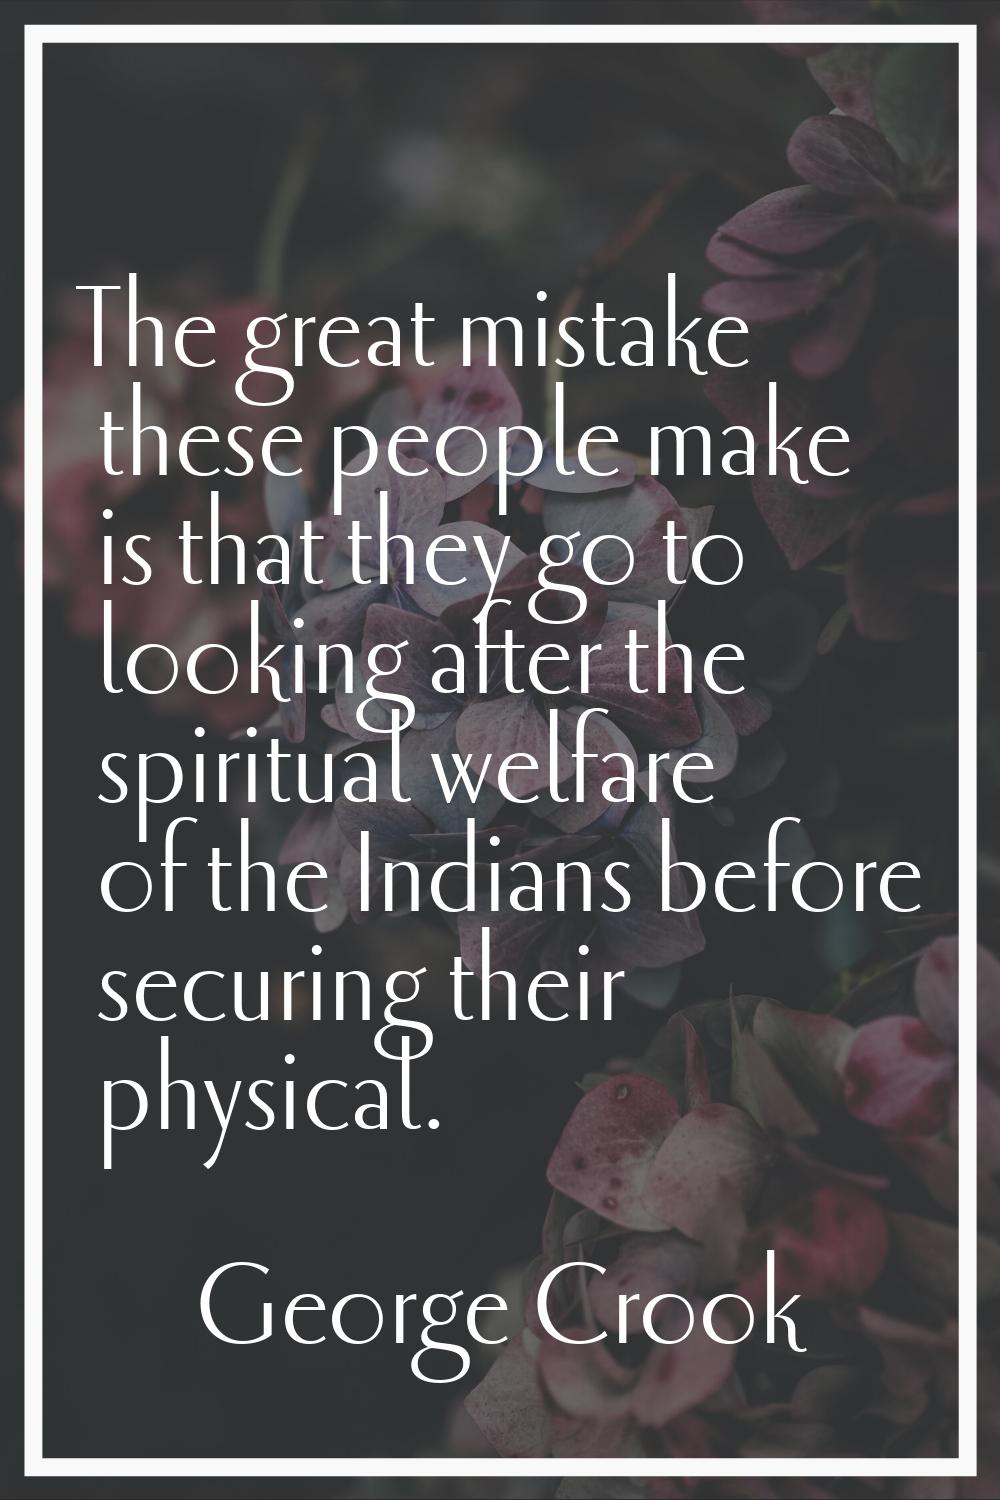 The great mistake these people make is that they go to looking after the spiritual welfare of the I